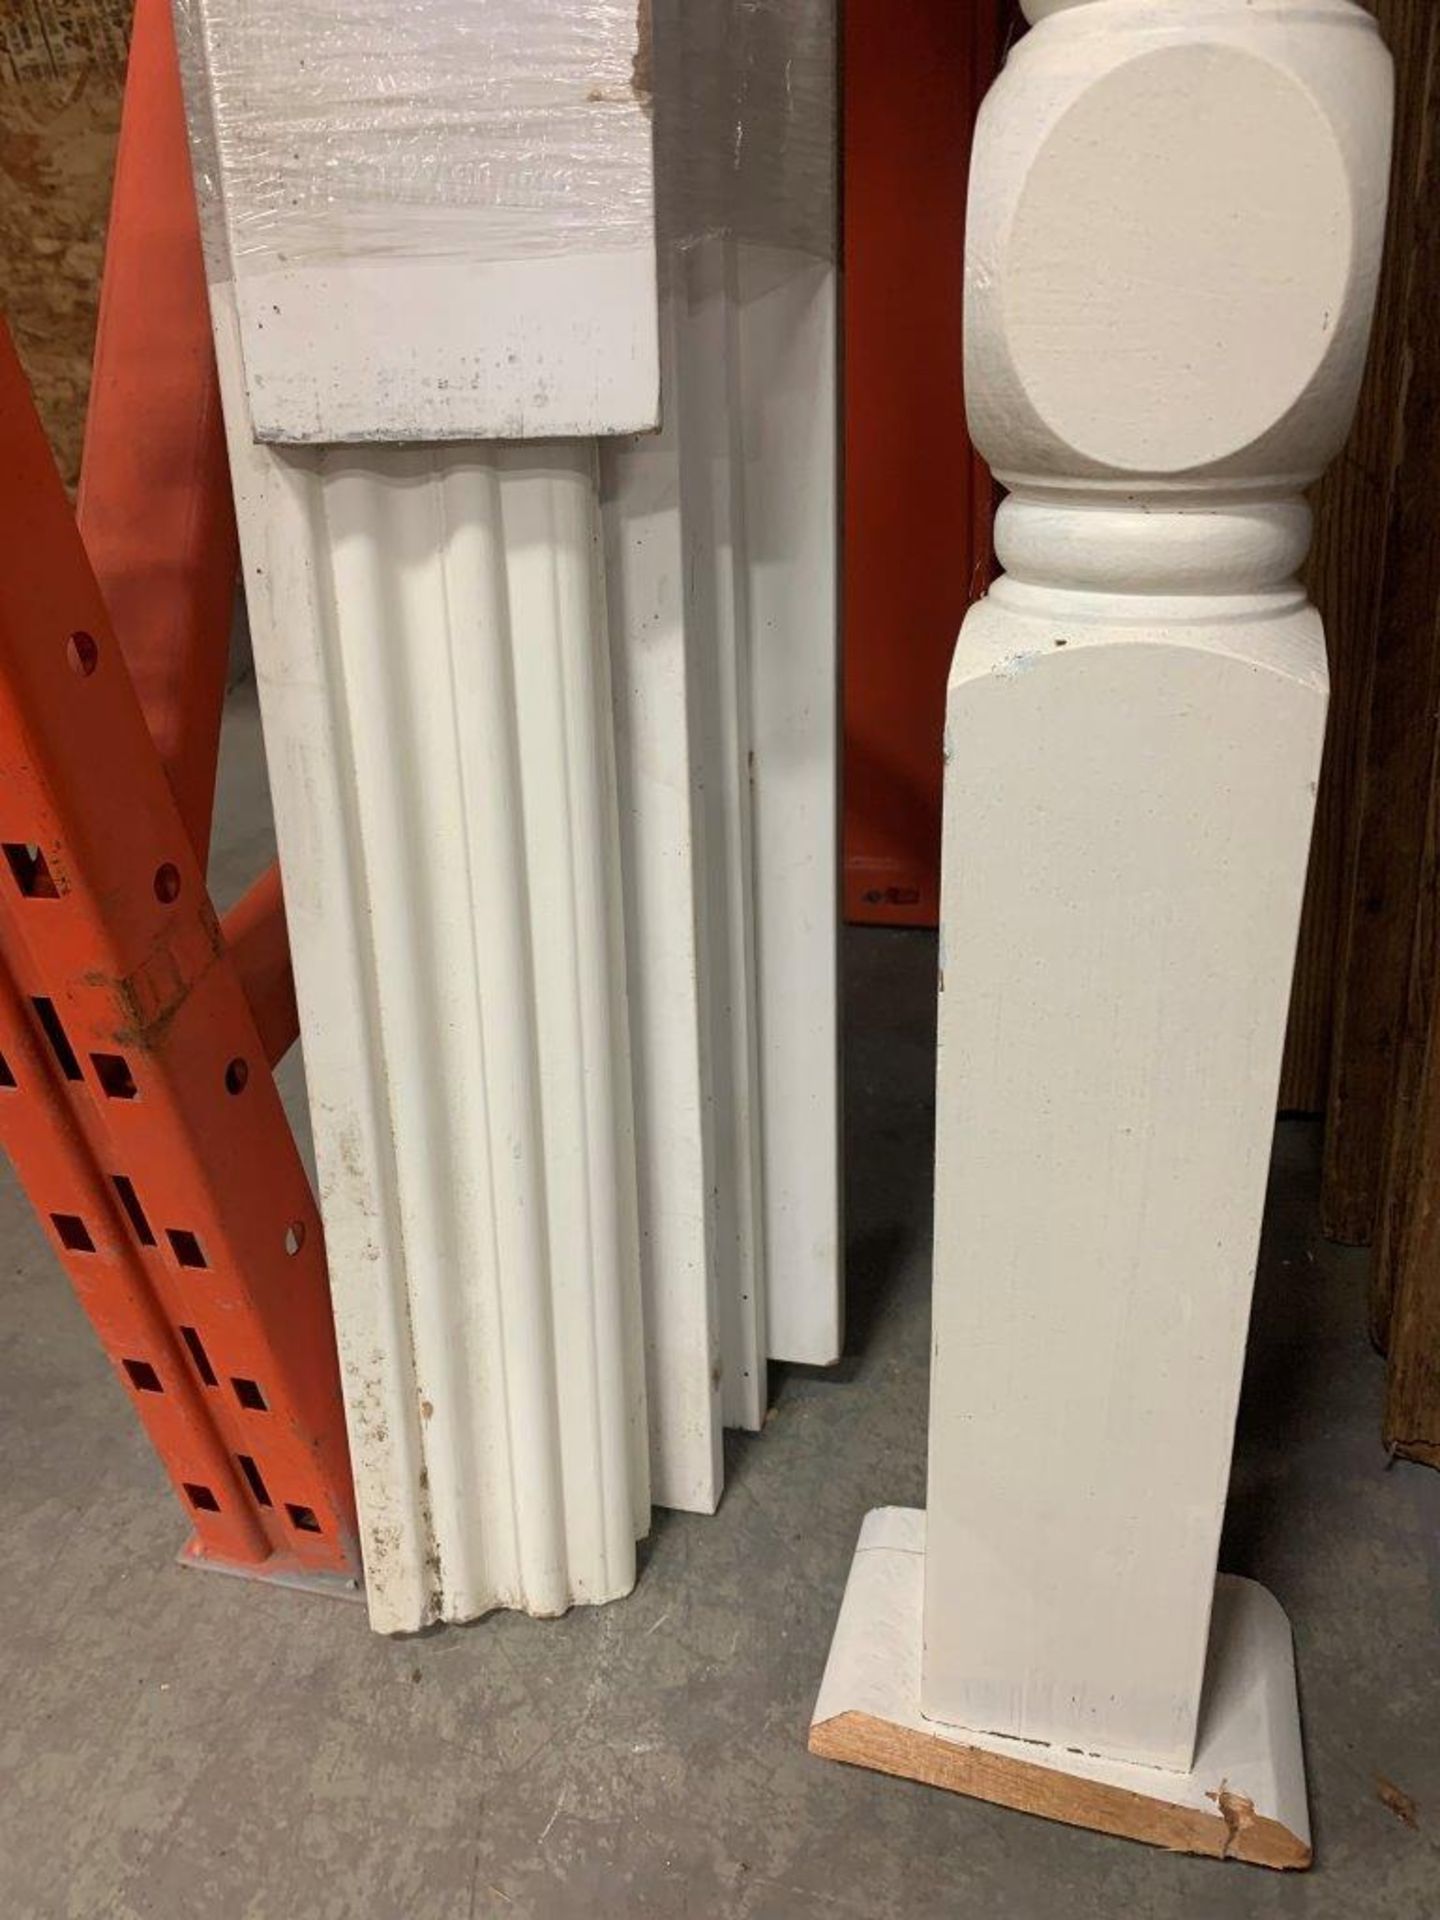 ASSORTED MDF PRIMED BOARDS, BASEBOARD, AND DECORATIVE POST - Image 2 of 2